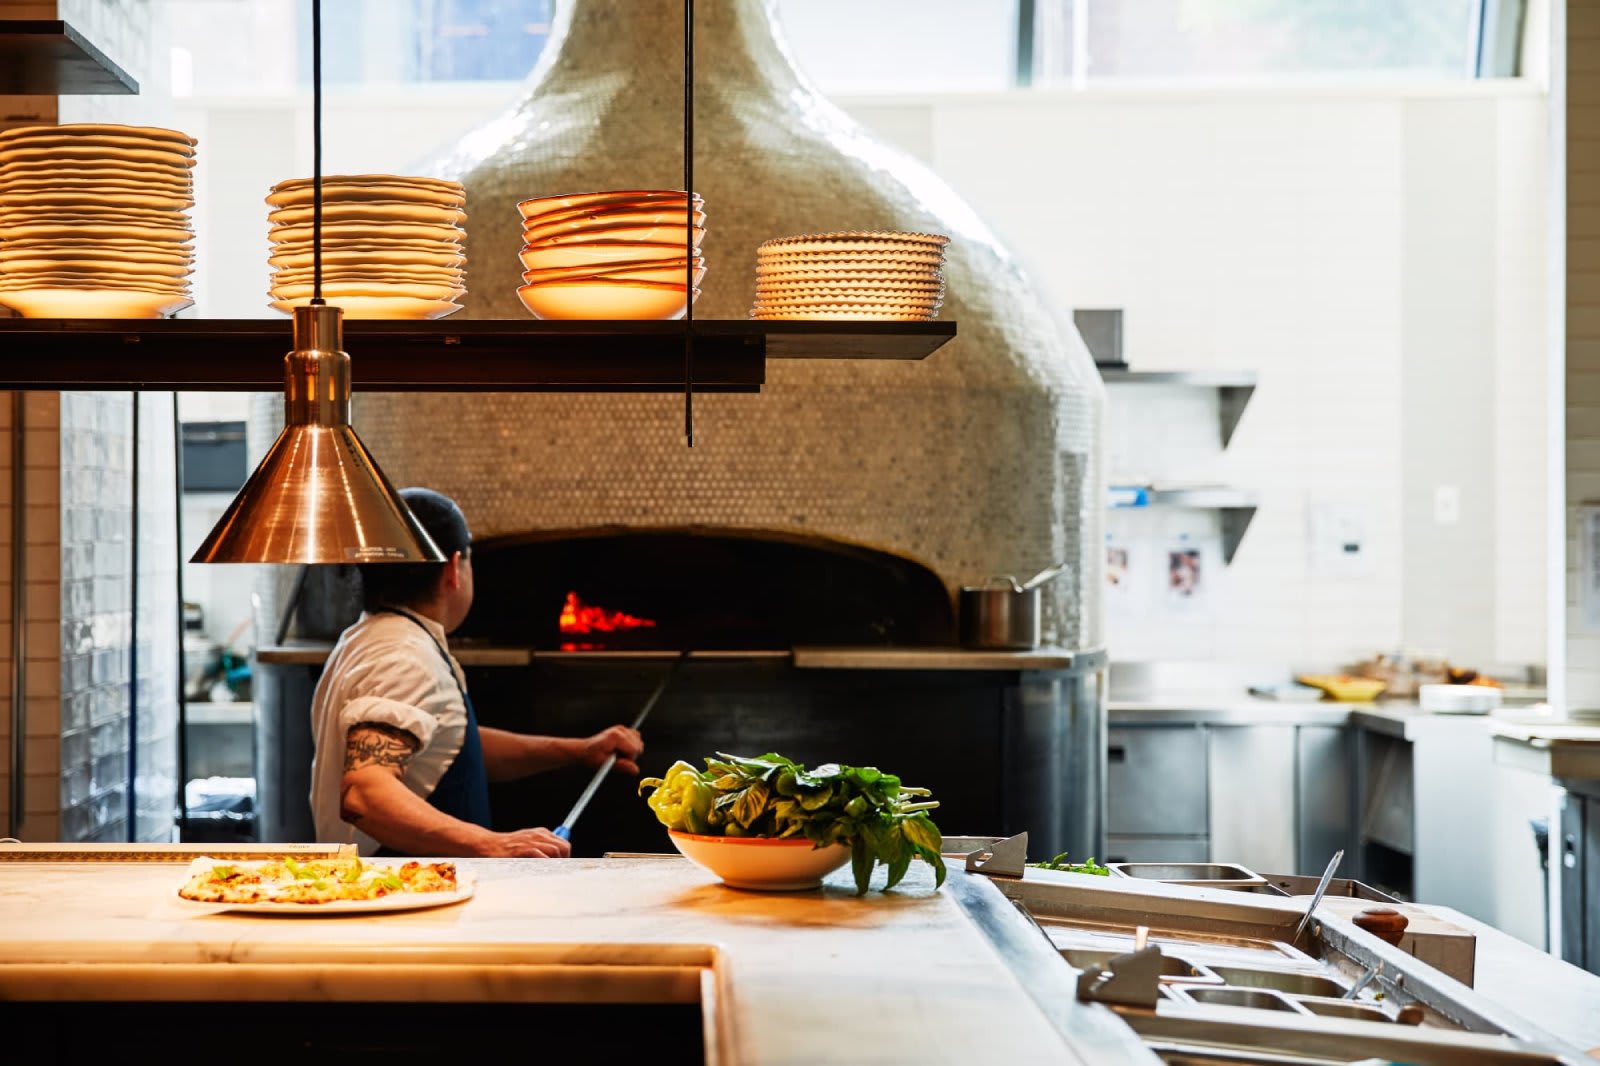 leuca dining, chef puts pizza to cook in the oven Image